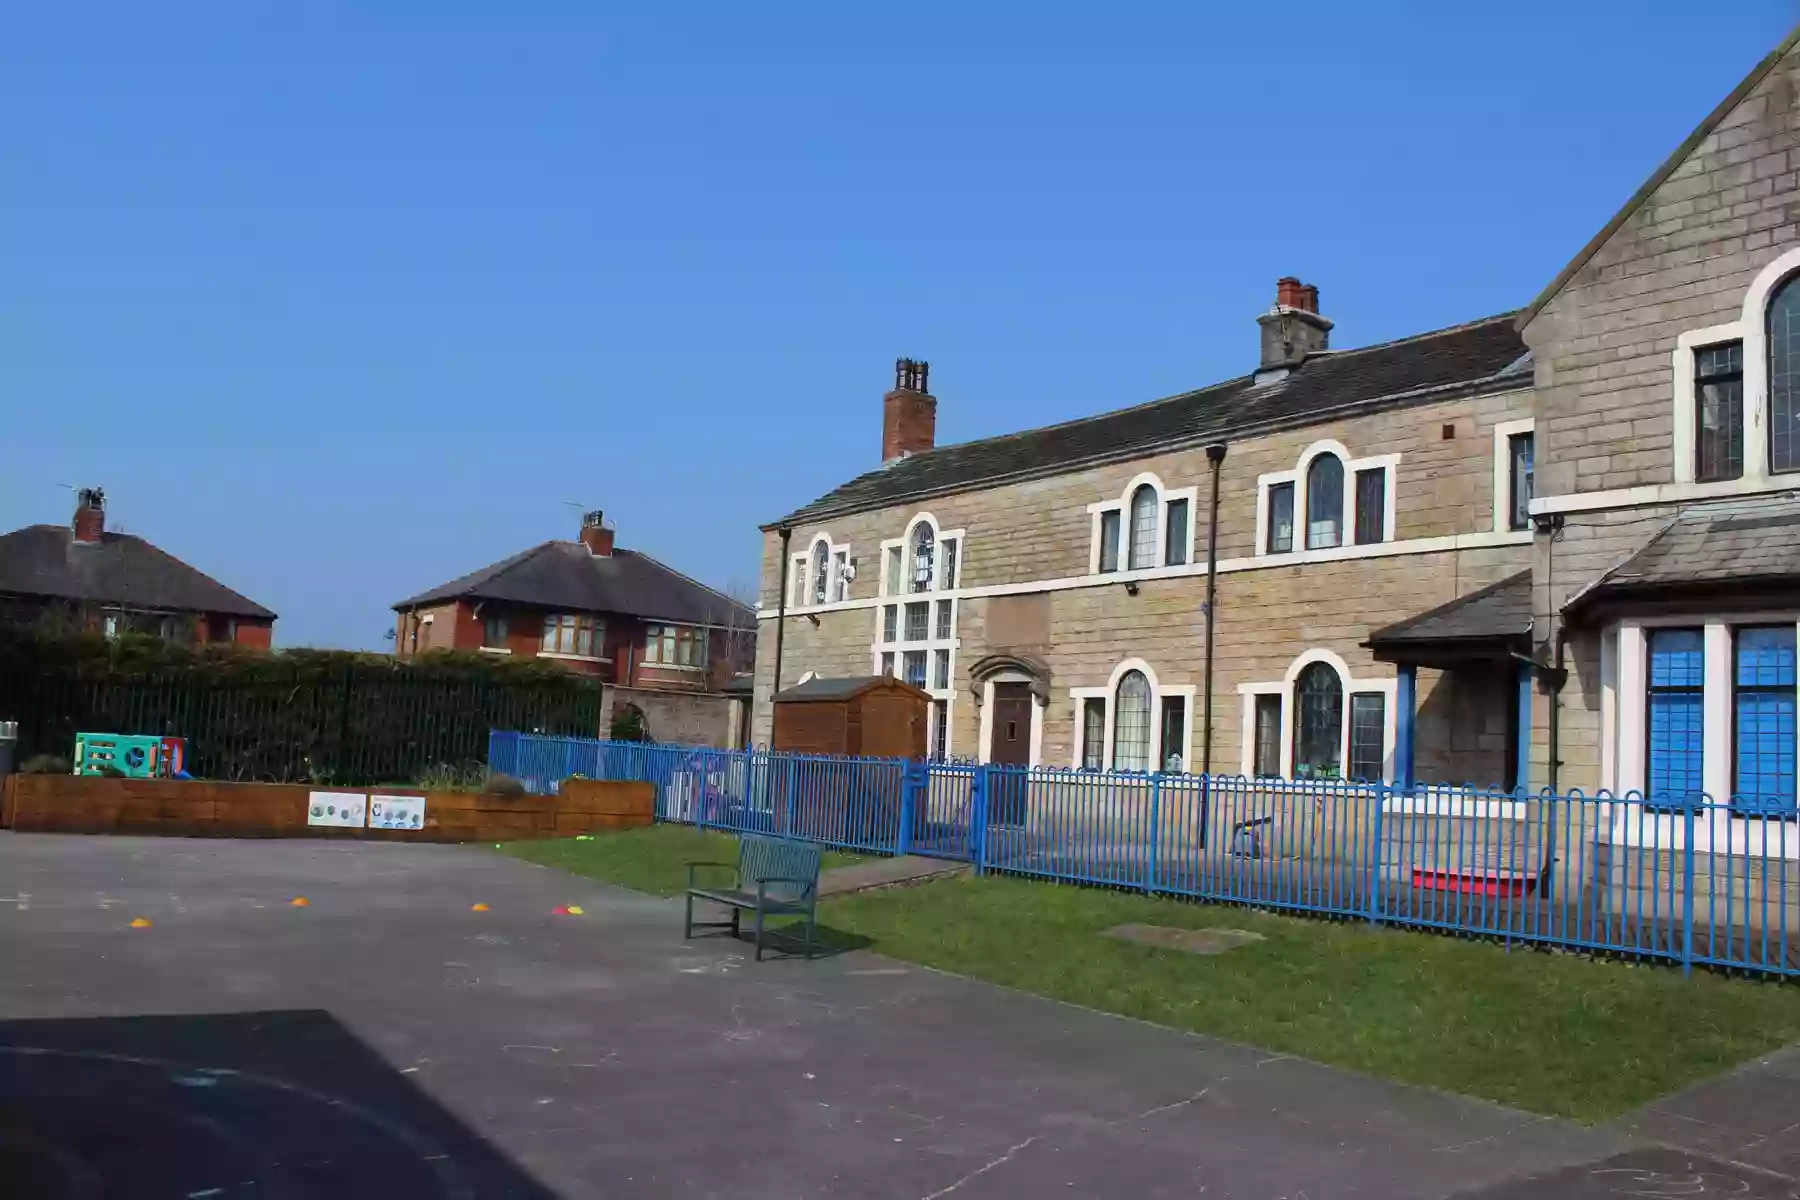 Stonehouse Childcare Private Day Nursery and Pre-school, Leyland